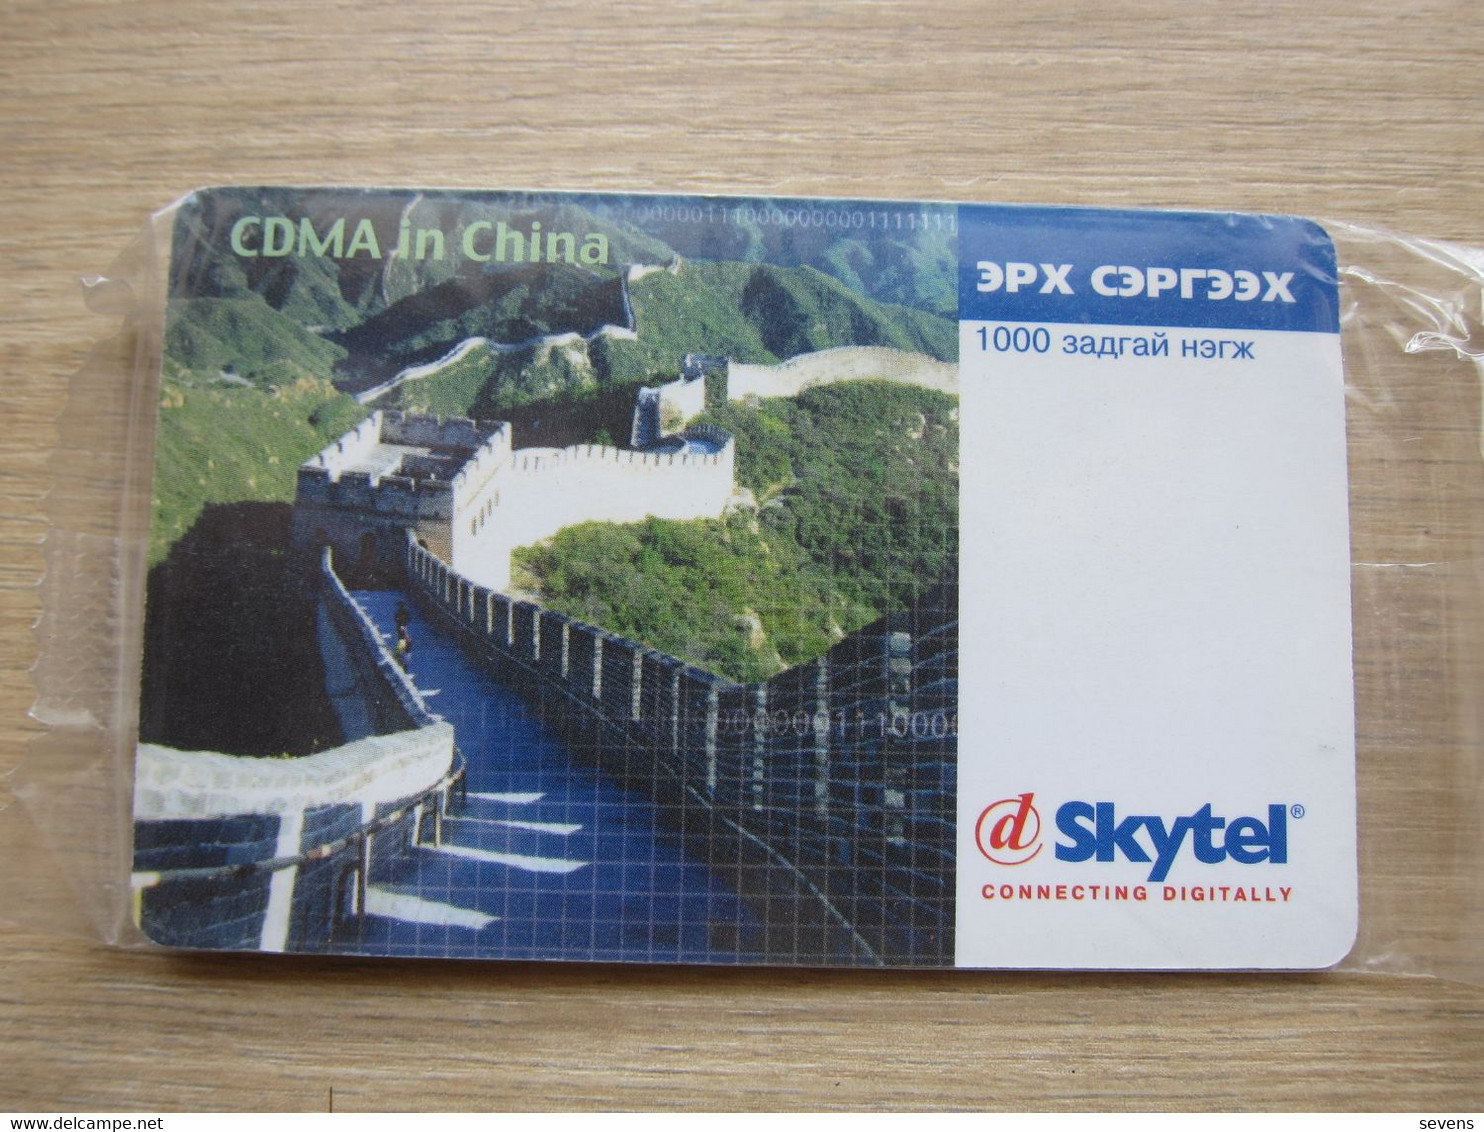 Skytel CDMA Prepaid Phonecard, The Great Wall, Mint In Blister Expired - Mongolie